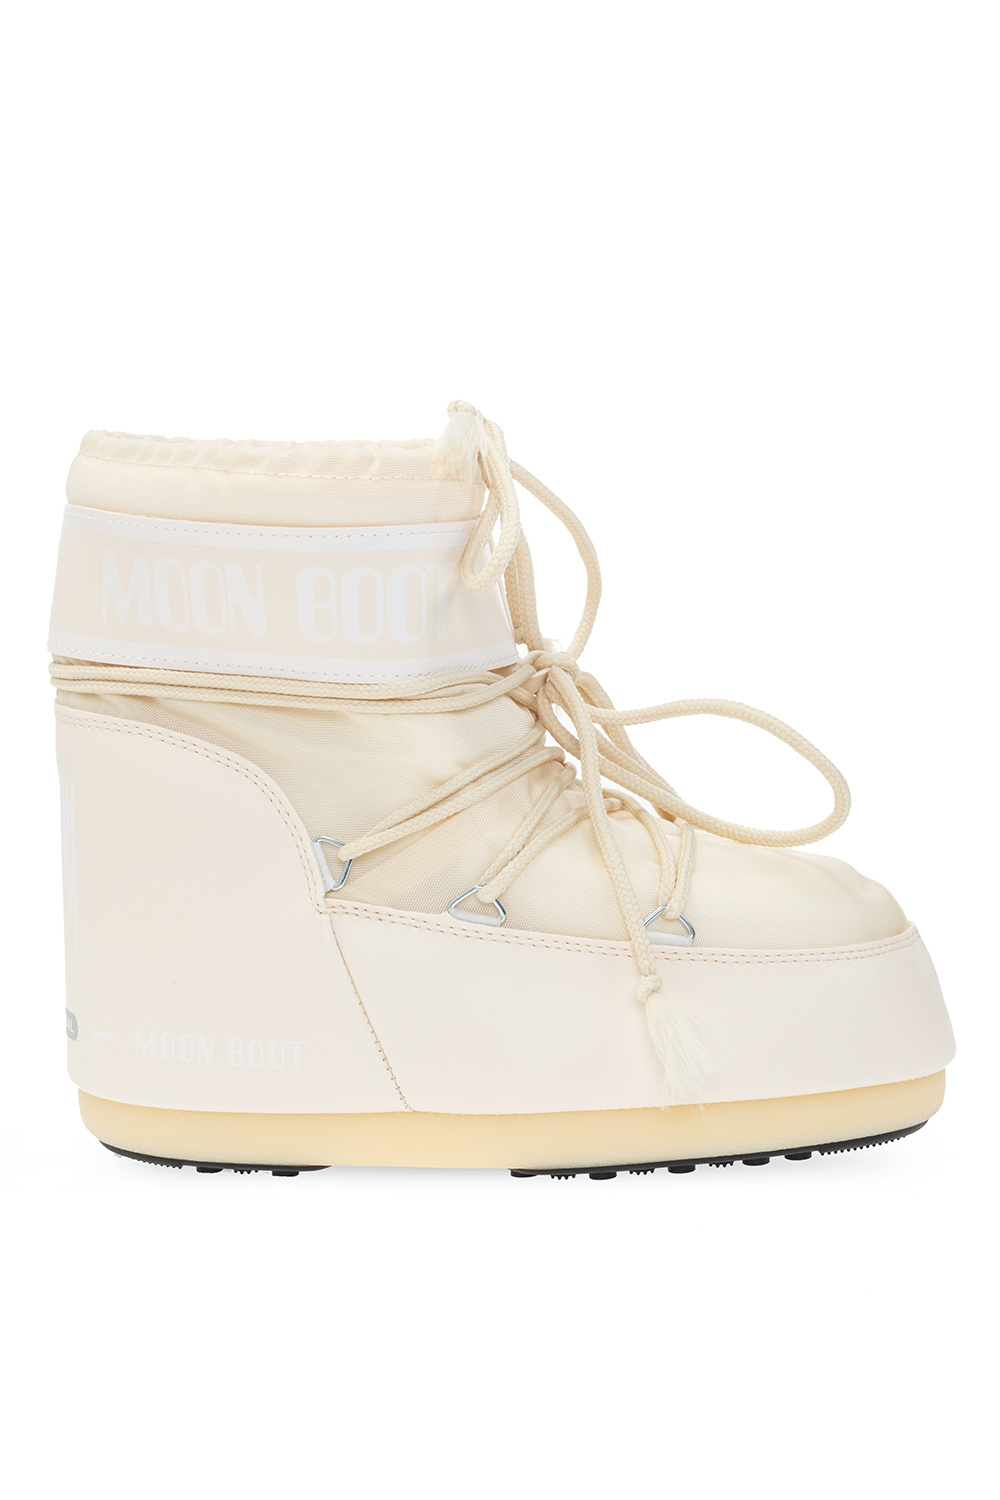 Golden Goose Sky Star high-top sneakers Silber - Cream 'Classic Low' snow boots  Moon Boot - IetpShops IC